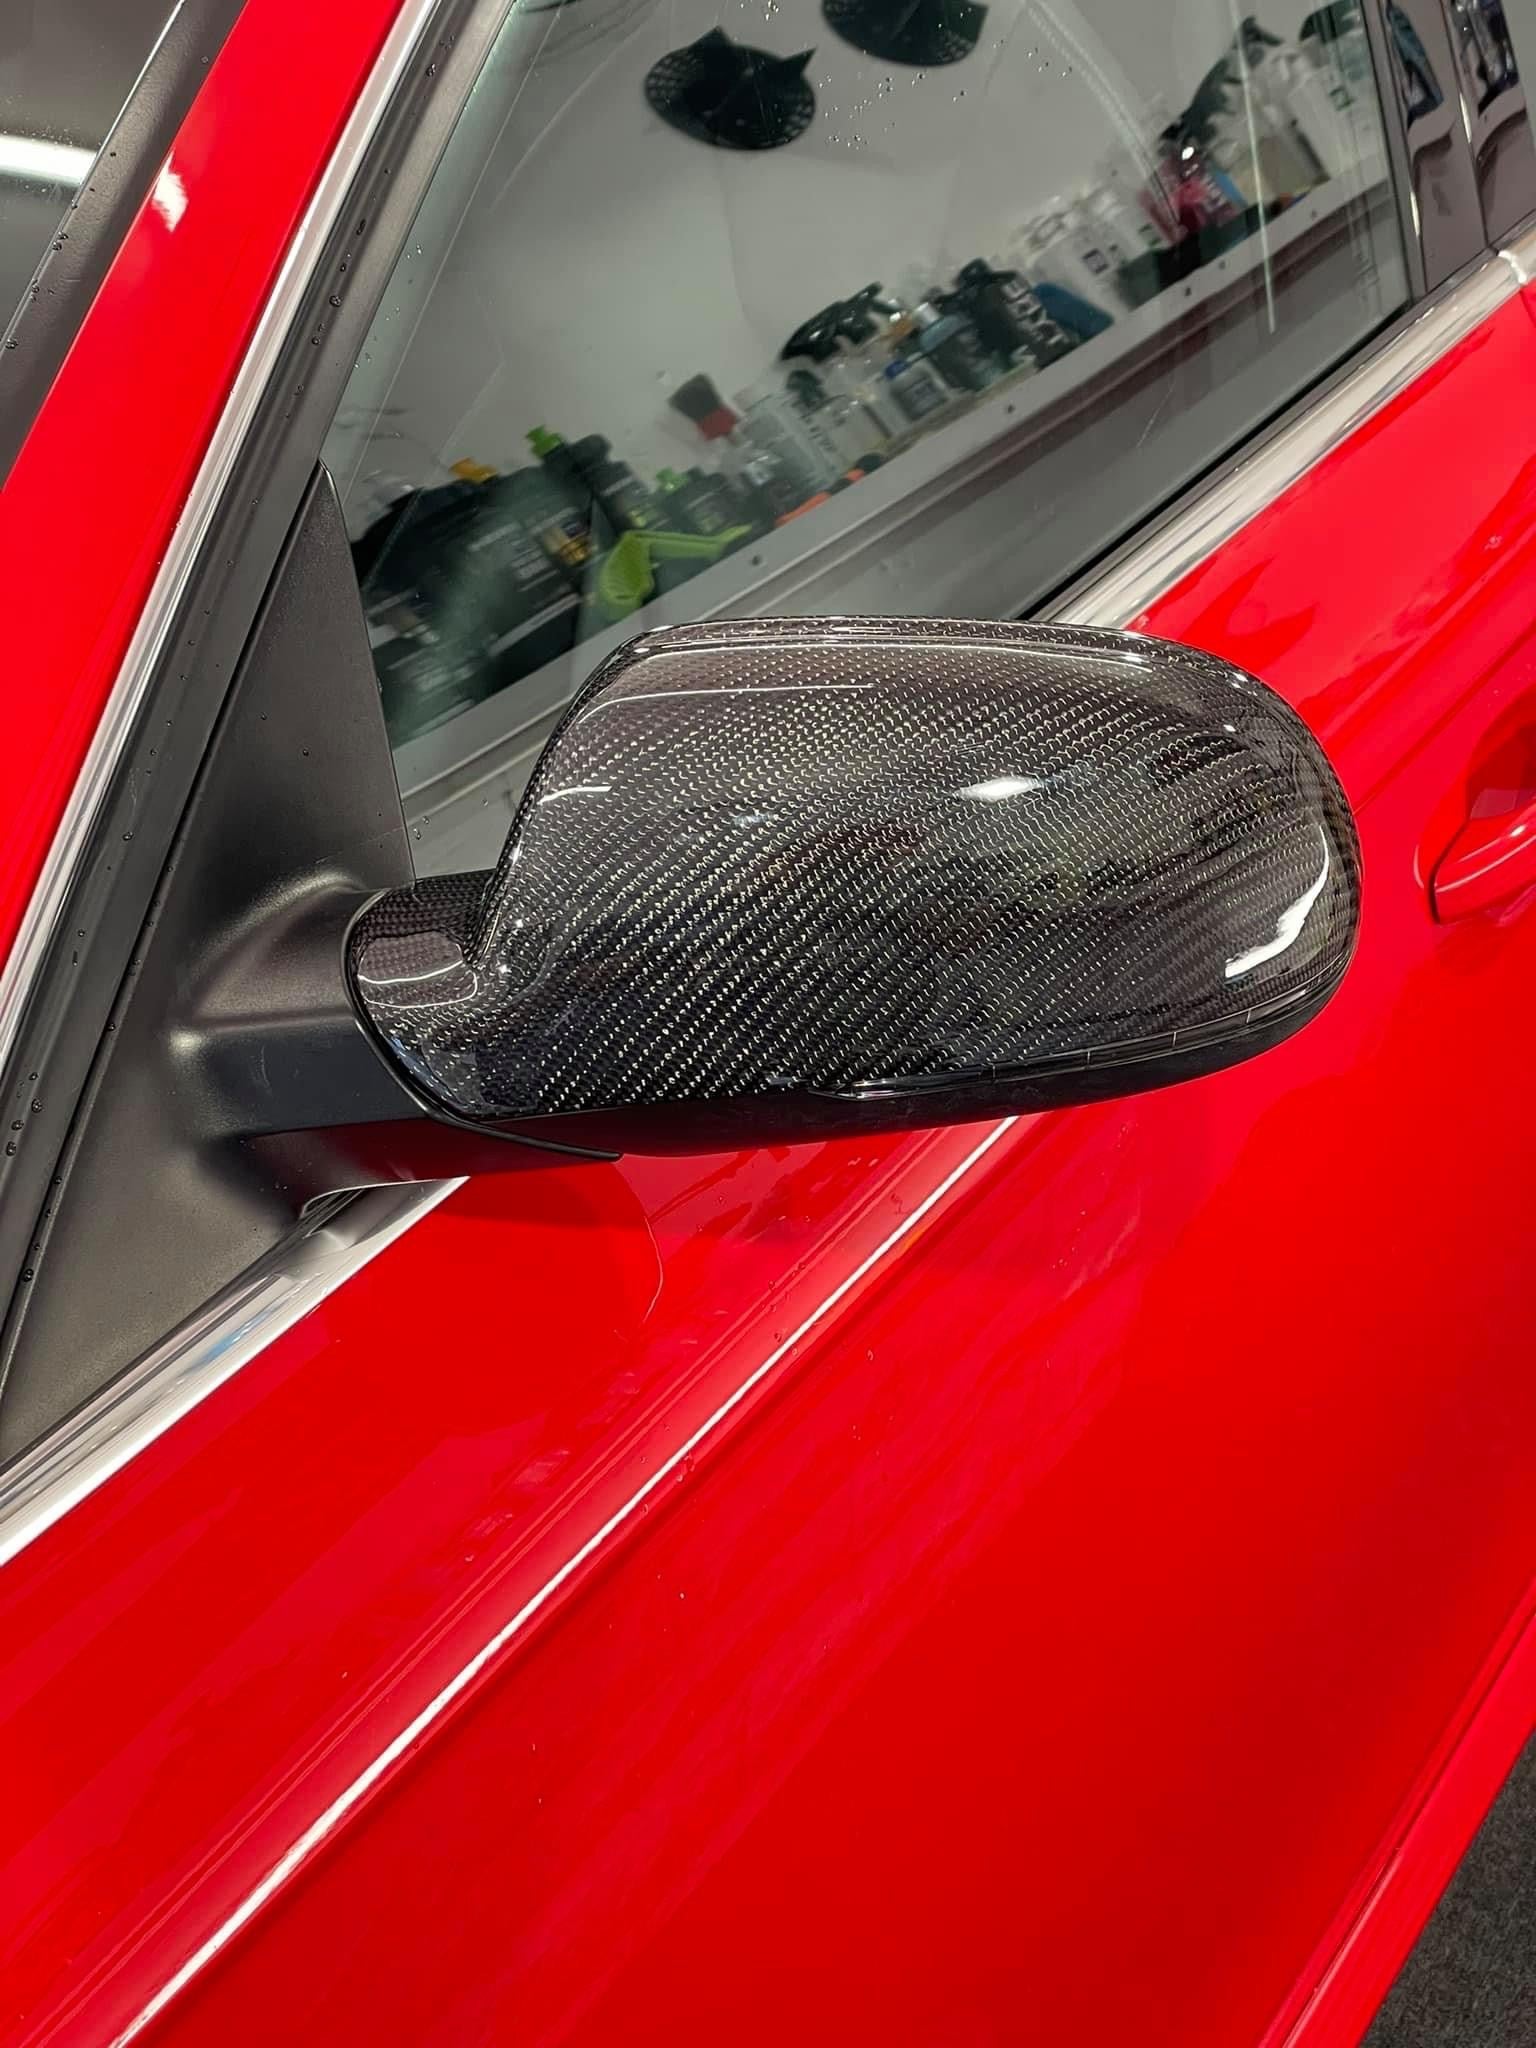 Audi A4/S4 and RS4 Replacement Carbon Fibre Mirror Covers - For the B8.5 Facelift Audi A4 Models. This product is manufactured from 2*2 Carbon Fibre Weave with an ABS Plastic base to ensure this products fitment is perfect for your model. This is a must for anyone looking to add a touch of unique carbon to their A4/S4 or RS4 Audi. 